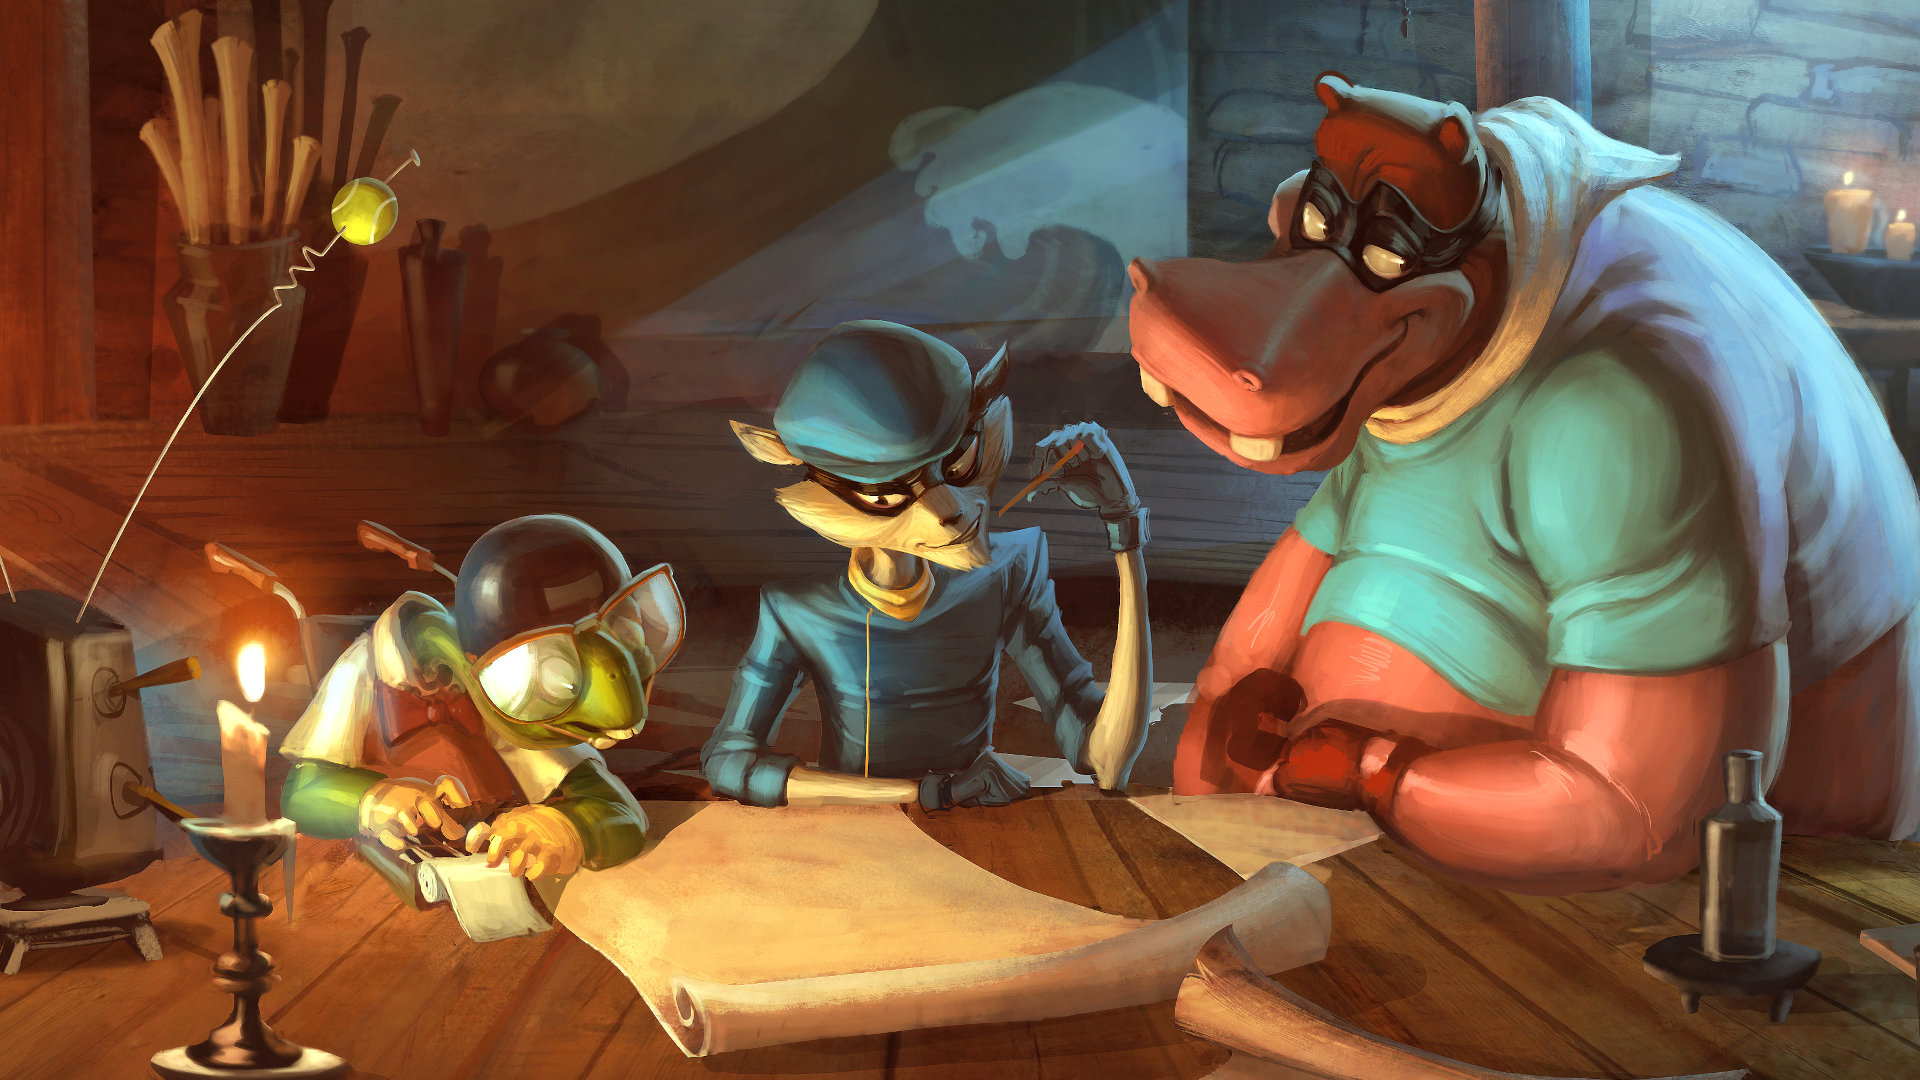 New FREE PS4/PS5 Game FINALLY Releasing on PSN, Sly Cooper New